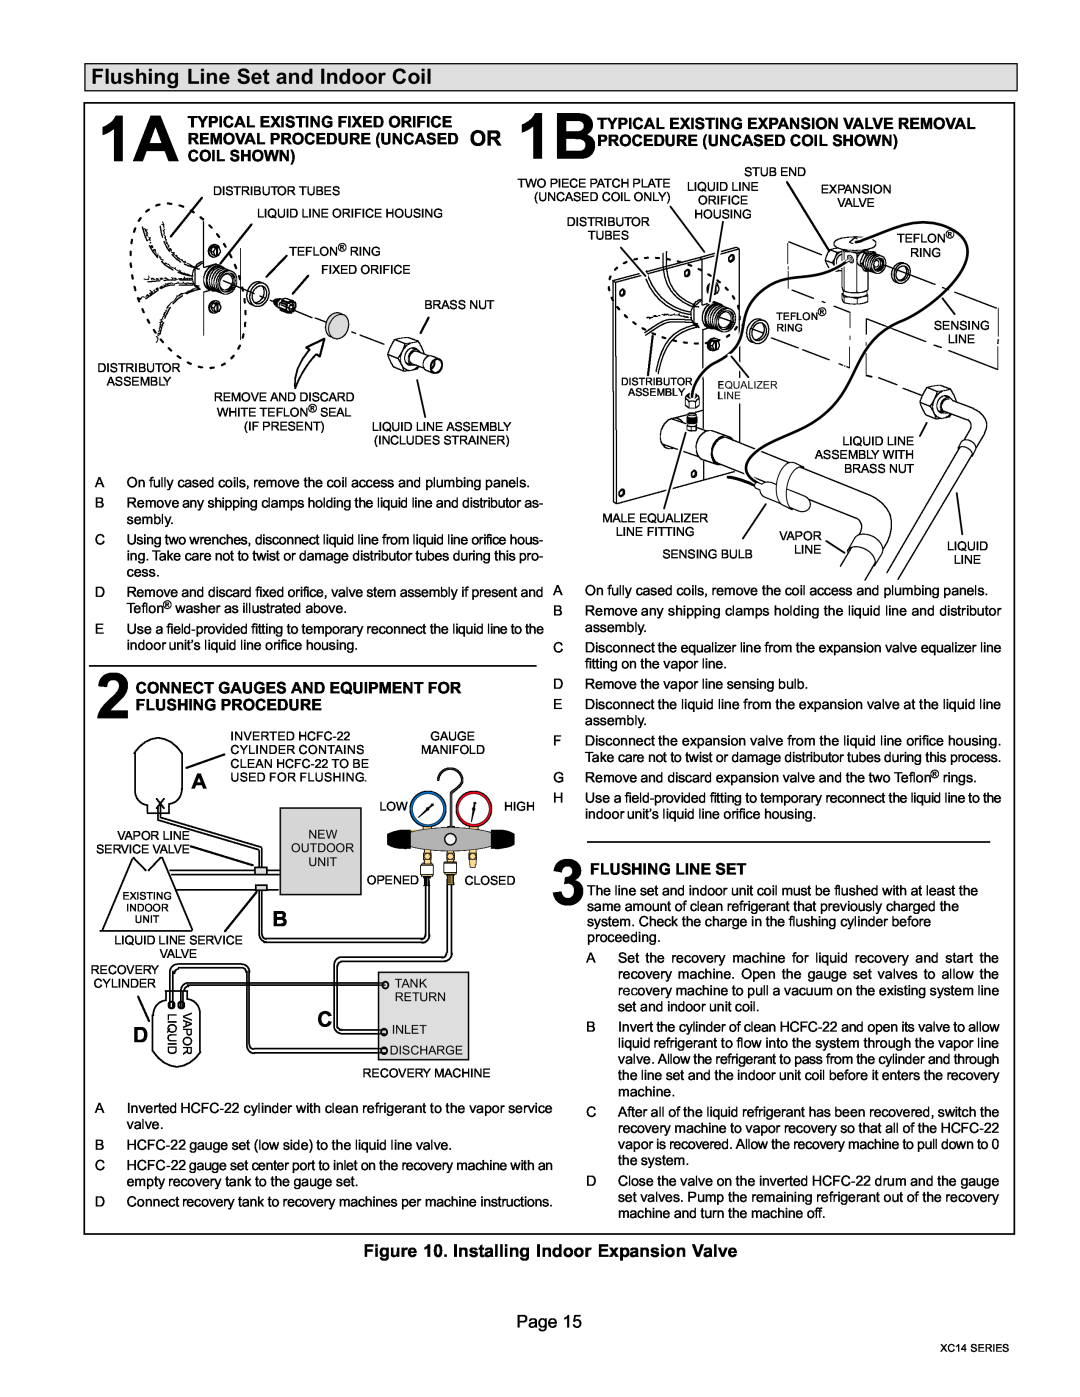 Lenox Elite Series, XC14 installation instructions Flushing Line Set and Indoor Coil, Installing Indoor Expansion Valve Page 